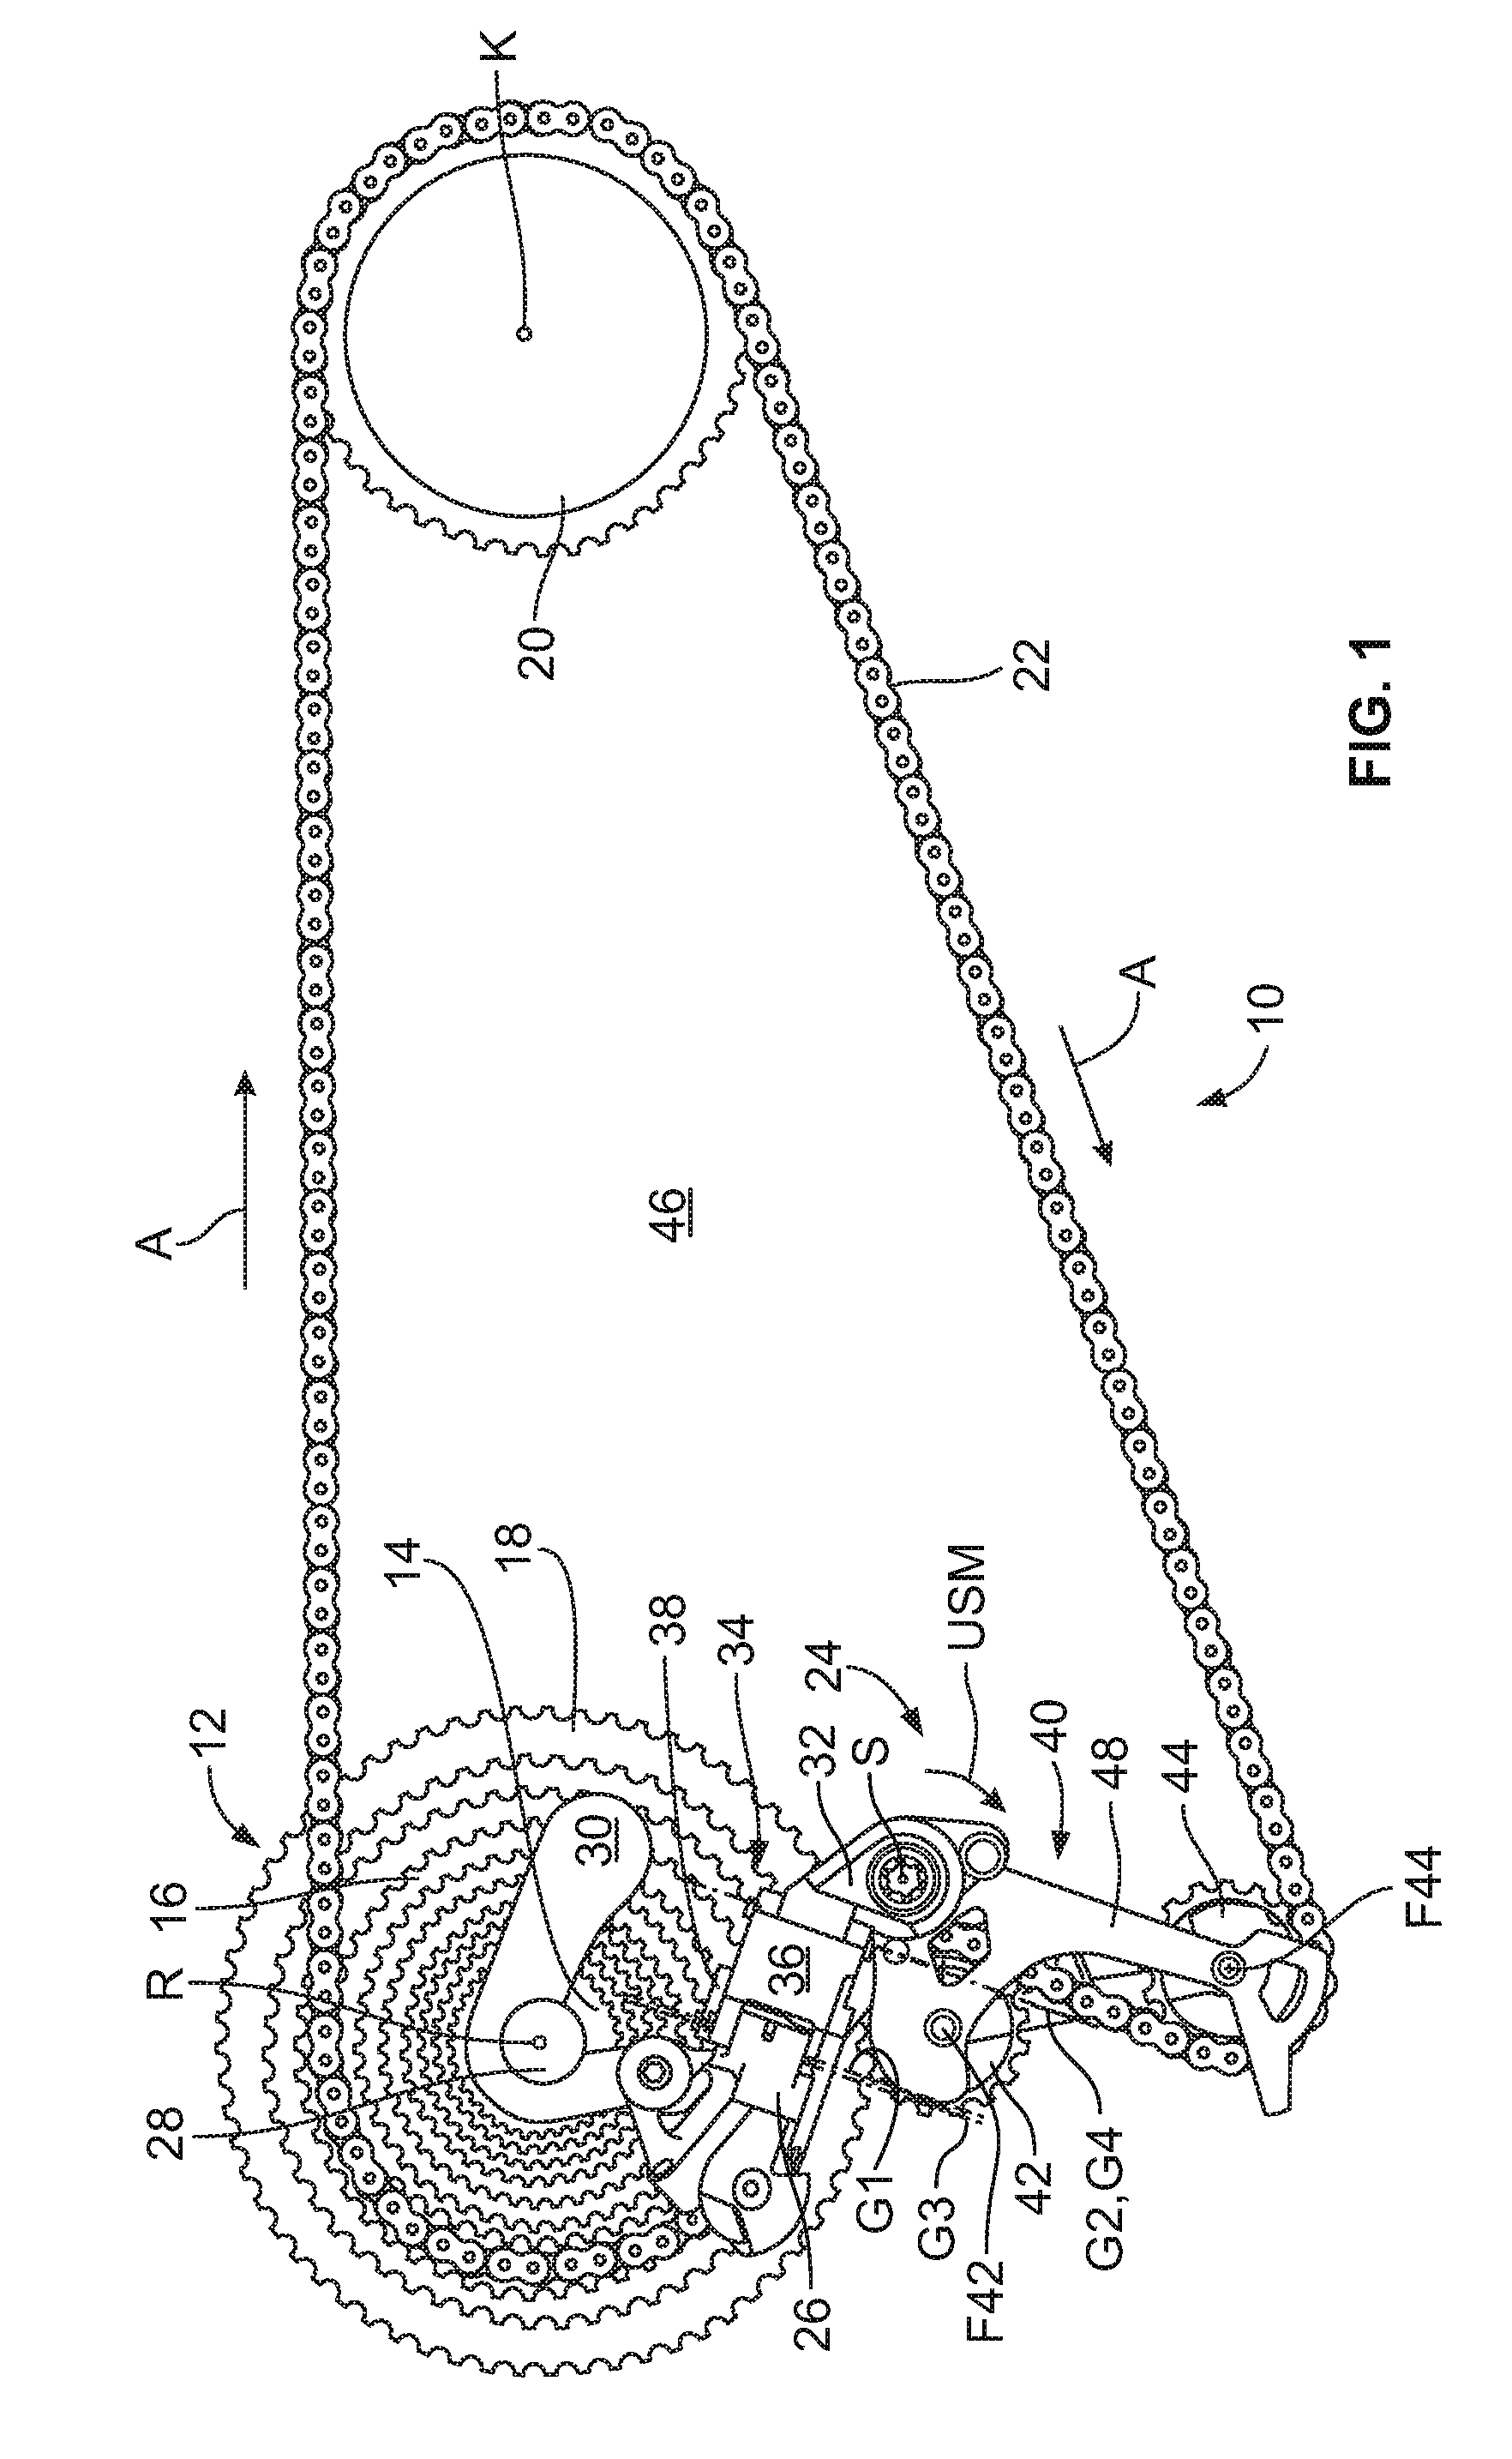 Drive arrangement for a bicycle, having a greater difference in the number of teeth between the largest and the smallest rear chain sprocket